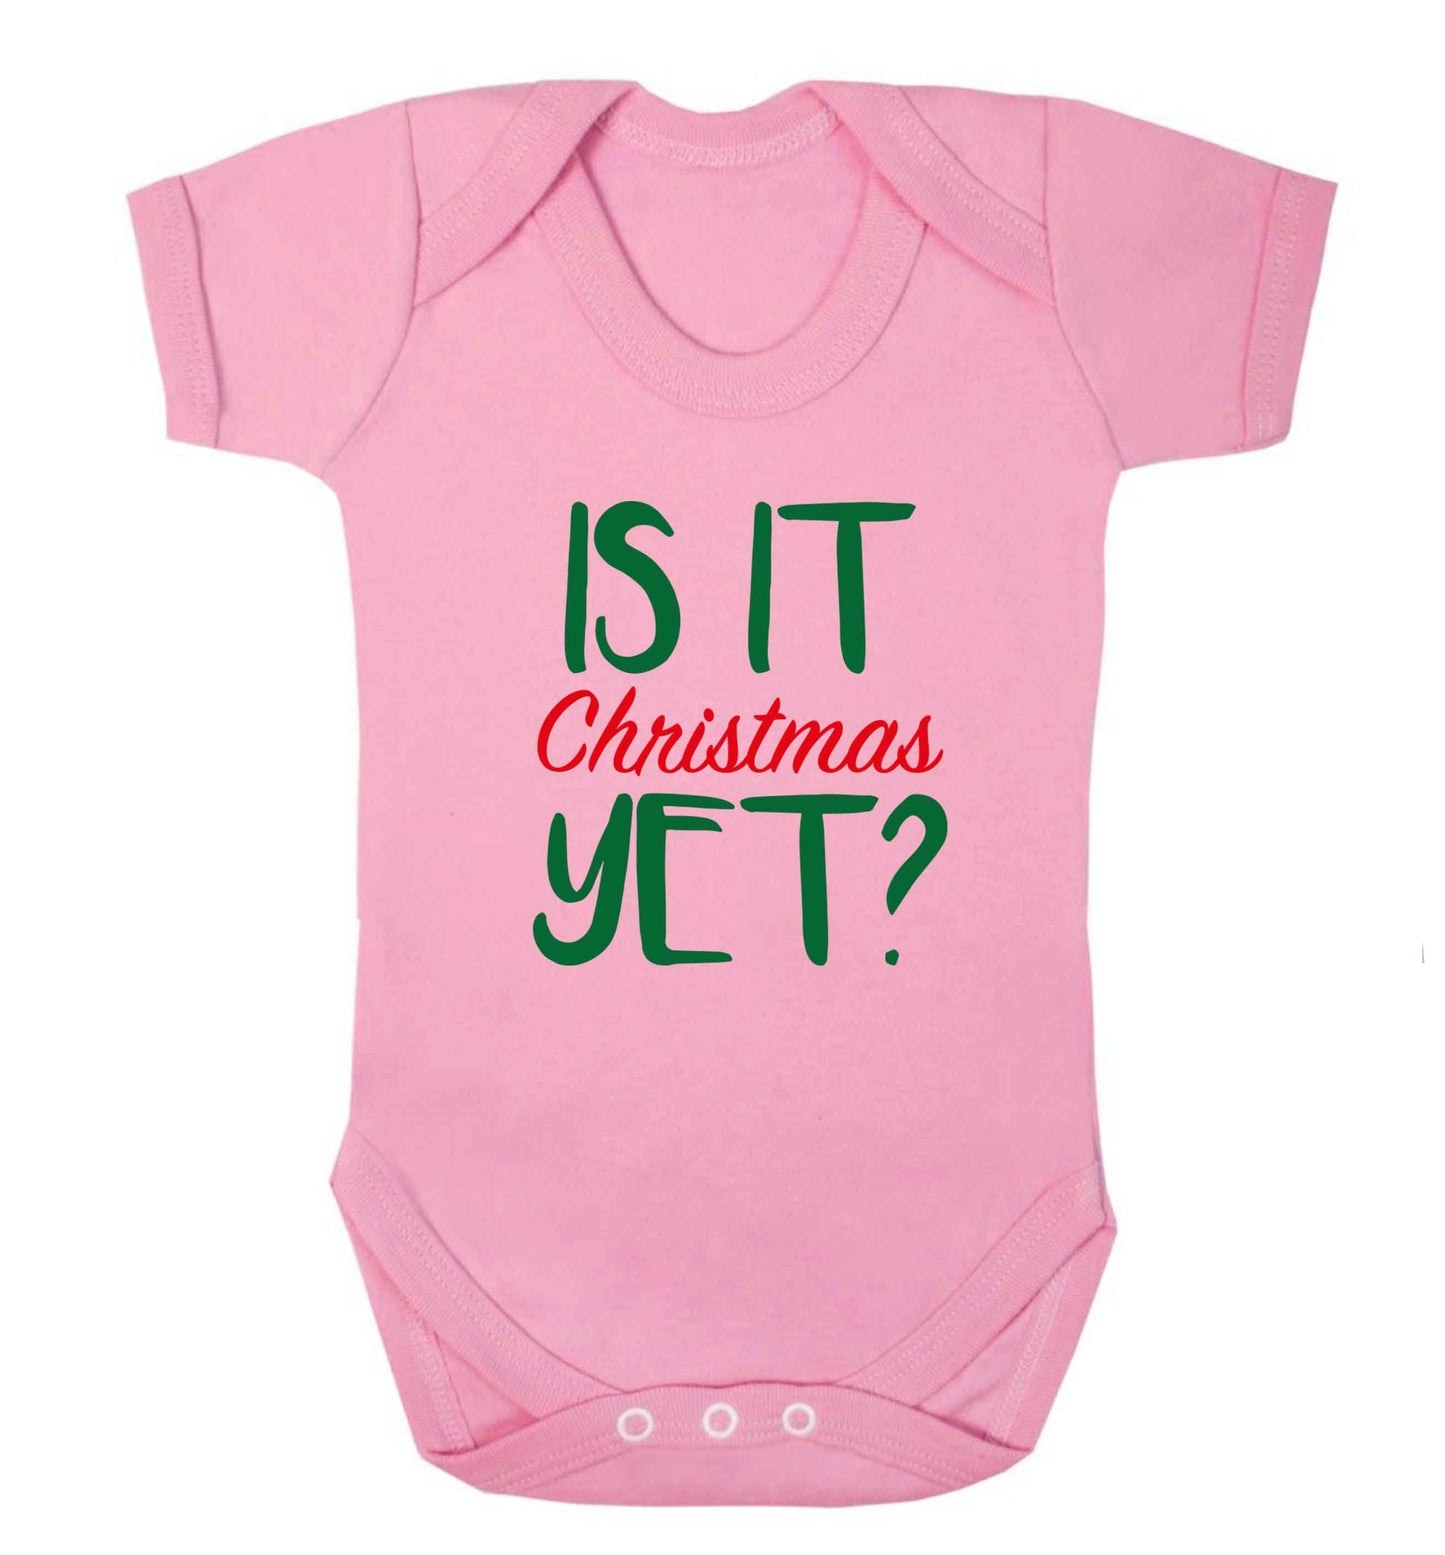 Is it Christmas yet? baby vest pale pink 18-24 months